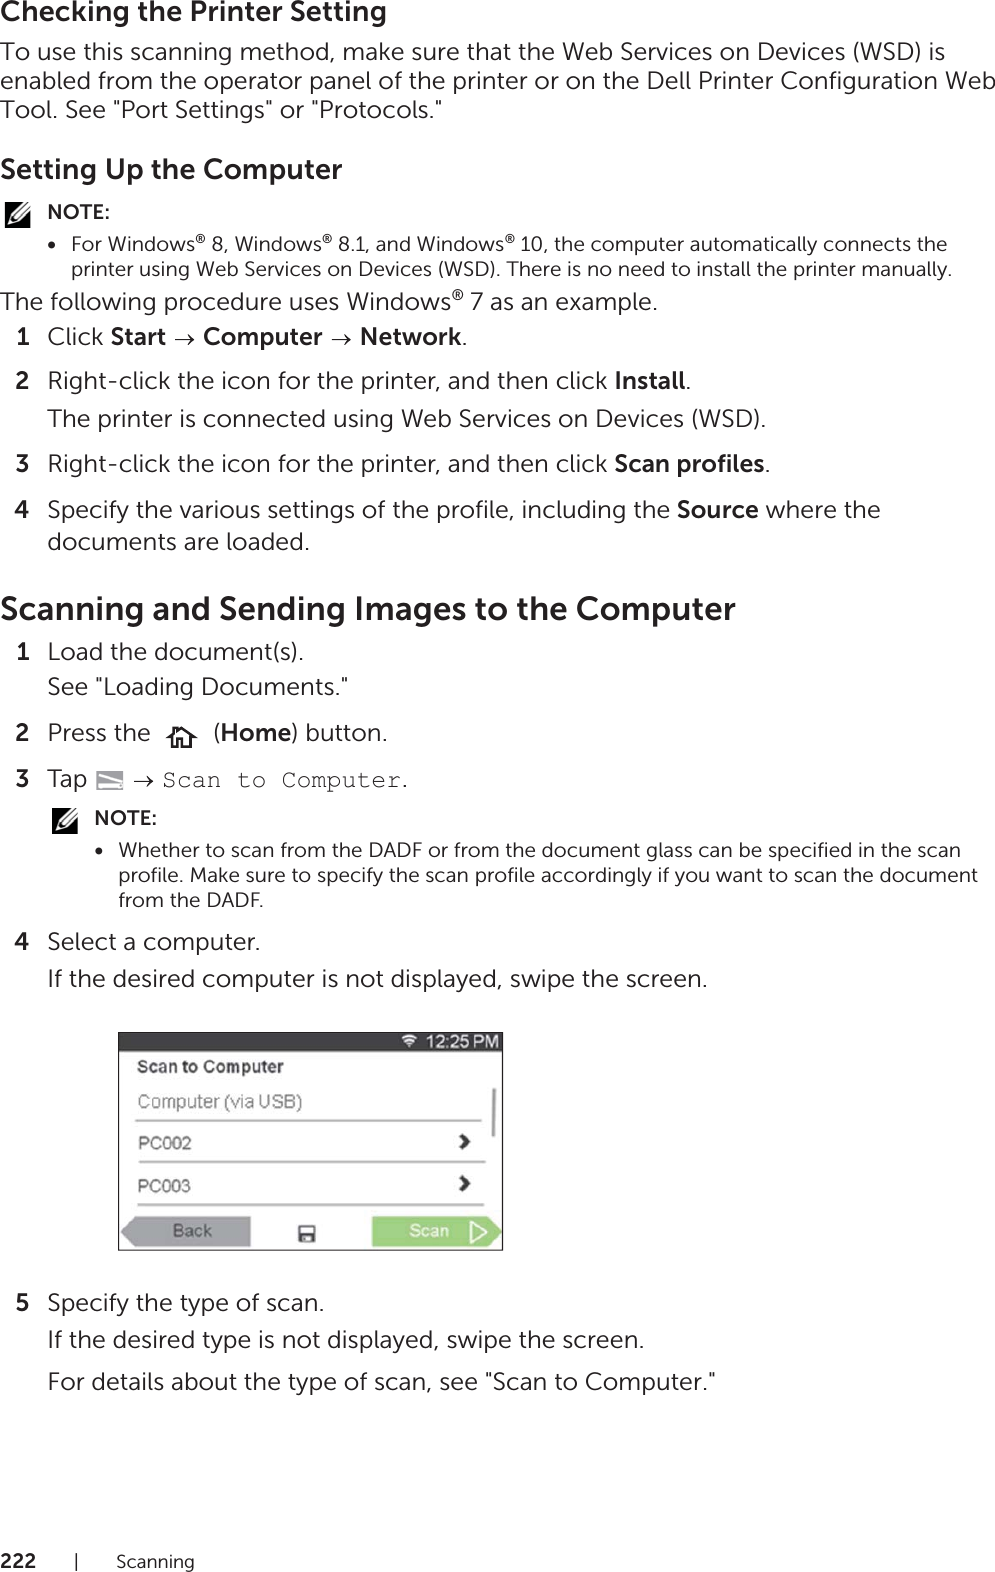 222|ScanningChecking the Printer SettingTo use this scanning method, make sure that the Web Services on Devices (WSD) is enabled from the operator panel of the printer or on the Dell Printer Configuration Web Tool. See &quot;Port Settings&quot; or &quot;Protocols.&quot;Setting Up the ComputerNOTE:•For Windows® 8, Windows® 8.1, and Windows® 10, the computer automatically connects the printer using Web Services on Devices (WSD). There is no need to install the printer manually.The following procedure uses Windows® 7 as an example.1Click Start  Computer  Network.2Right-click the icon for the printer, and then click Install.The printer is connected using Web Services on Devices (WSD).3Right-click the icon for the printer, and then click Scan profiles.4Specify the various settings of the profile, including the Source where the documents are loaded.Scanning and Sending Images to the Computer1Load the document(s).See &quot;Loading Documents.&quot;2Press the   (Home) button.3Tap   Scan to Computer.NOTE:•Whether to scan from the DADF or from the document glass can be specified in the scan profile. Make sure to specify the scan profile accordingly if you want to scan the document from the DADF.4Select a computer.If the desired computer is not displayed, swipe the screen.5Specify the type of scan.If the desired type is not displayed, swipe the screen.For details about the type of scan, see &quot;Scan to Computer.&quot;